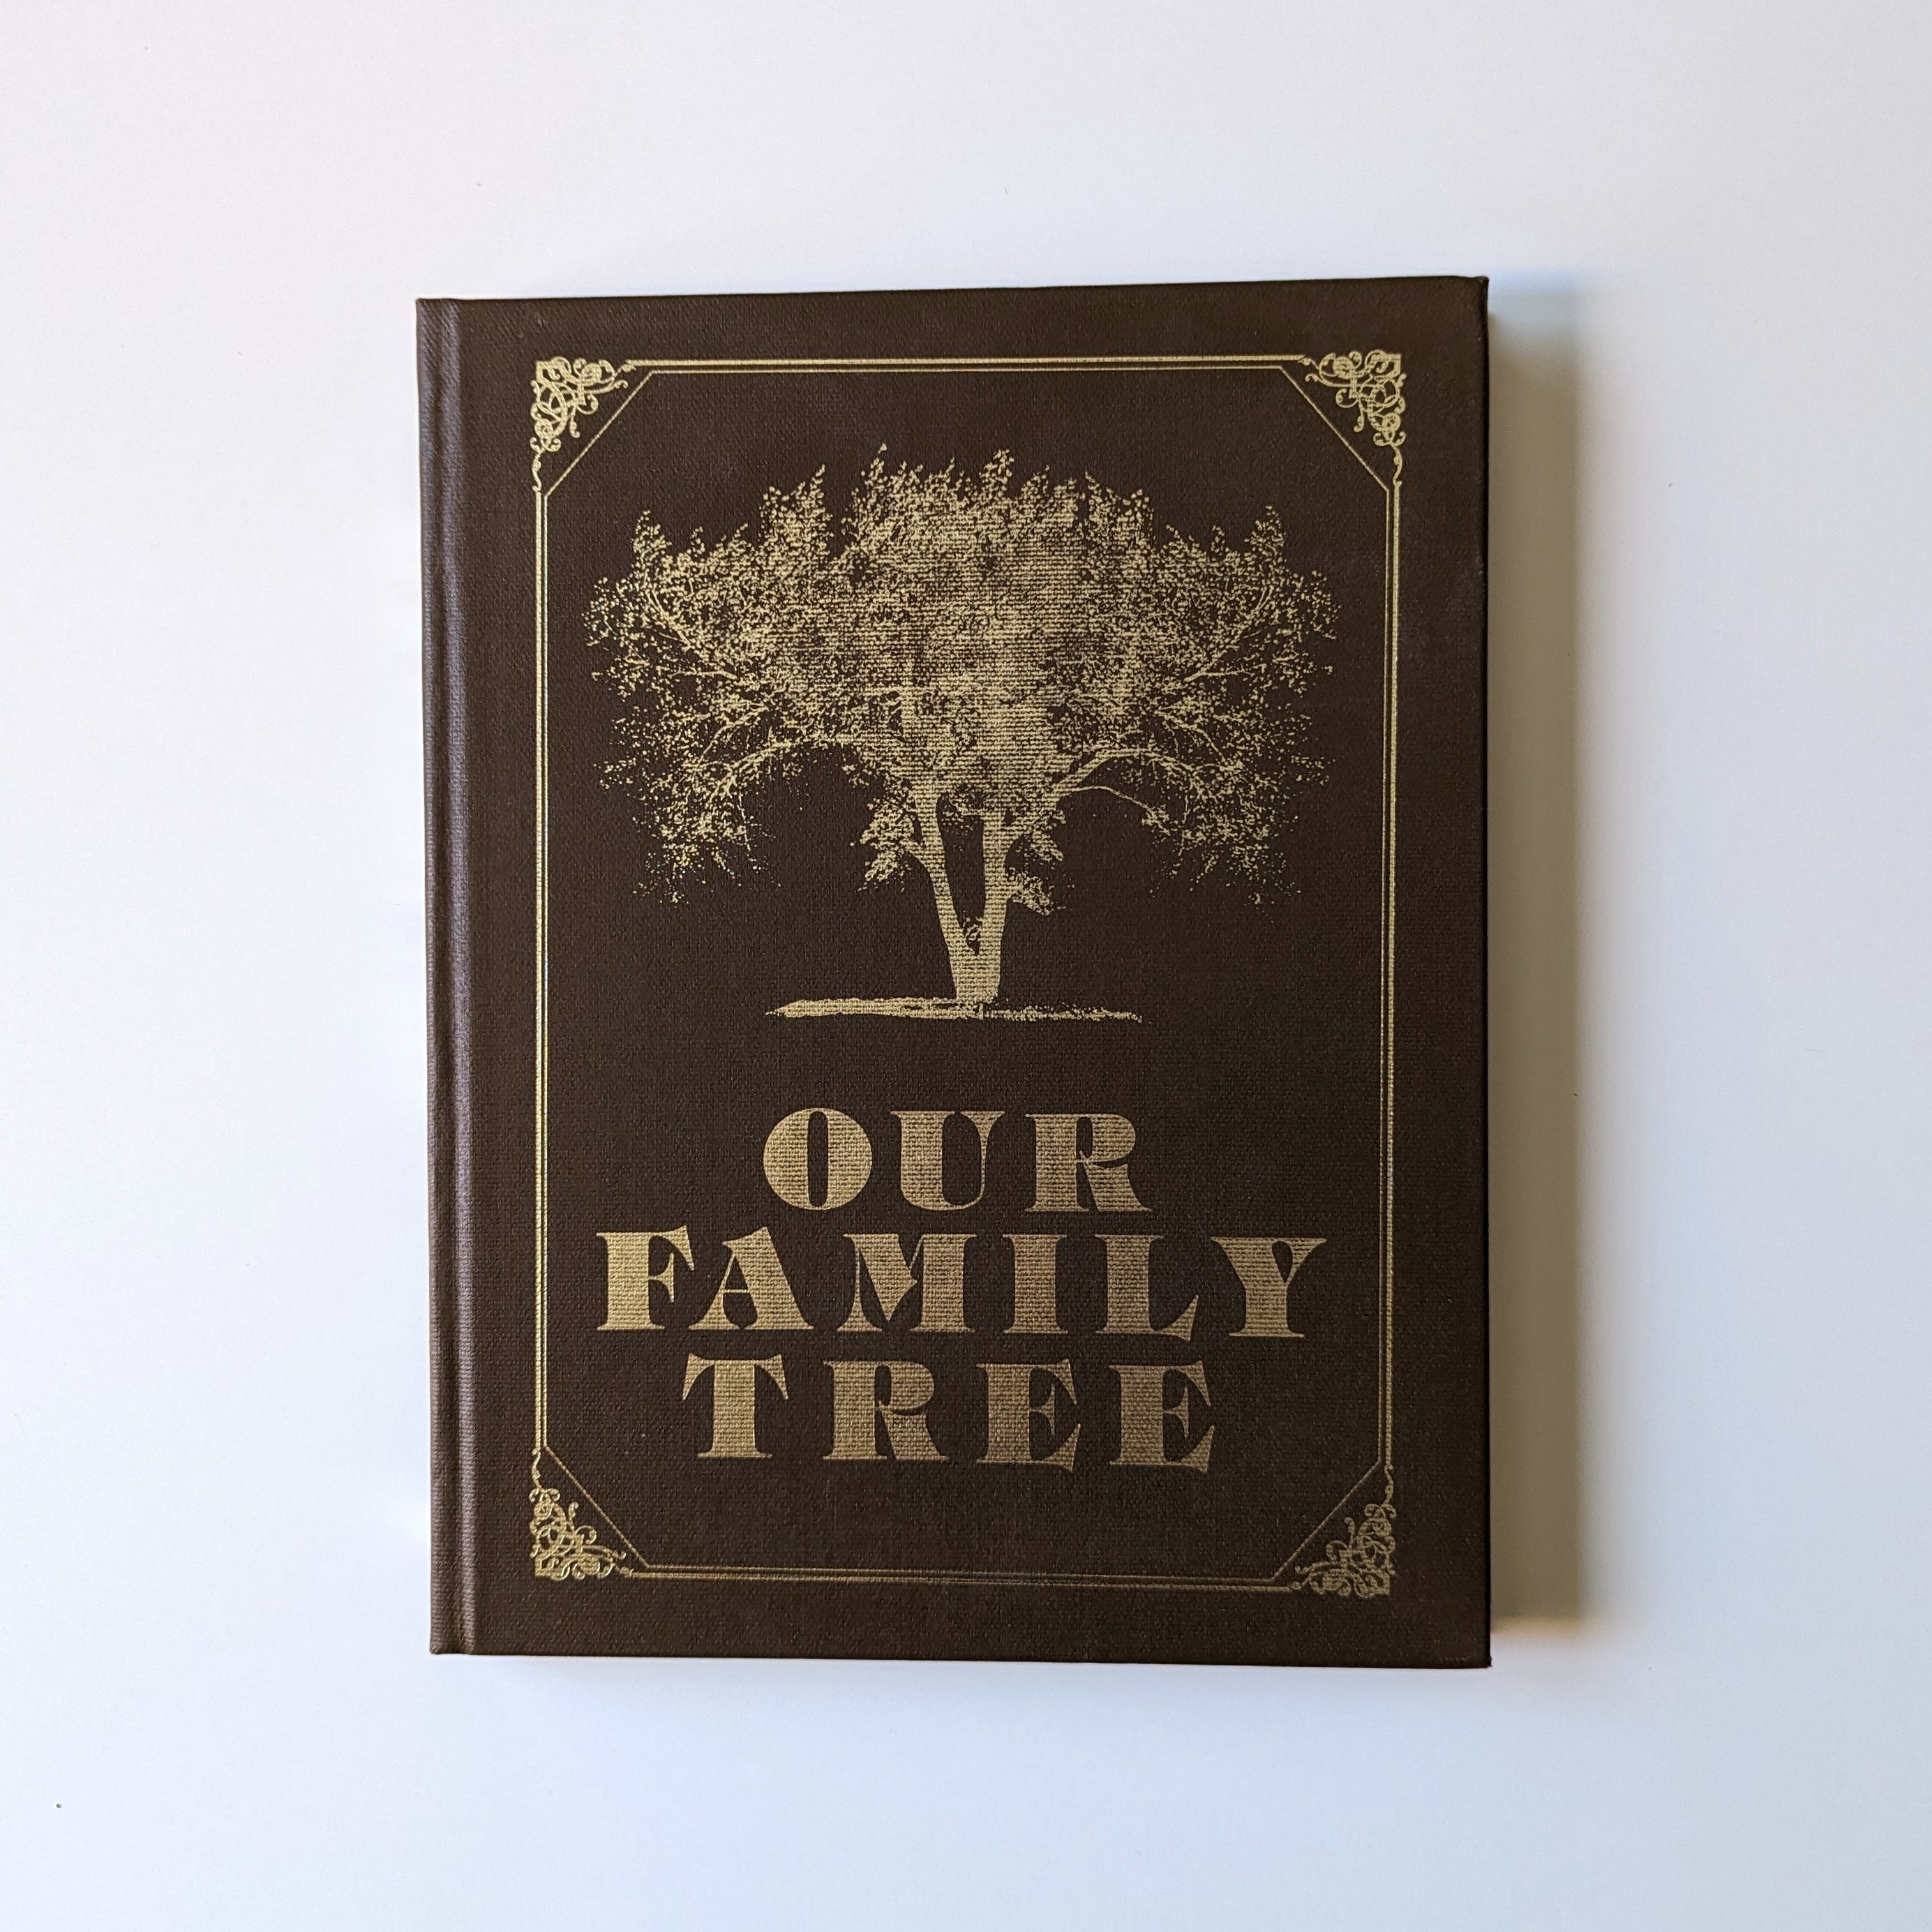 TARGET Our Family Tree Notebook - (Family Tree Workbooks) by House Elves  Anonymous (Hardcover)